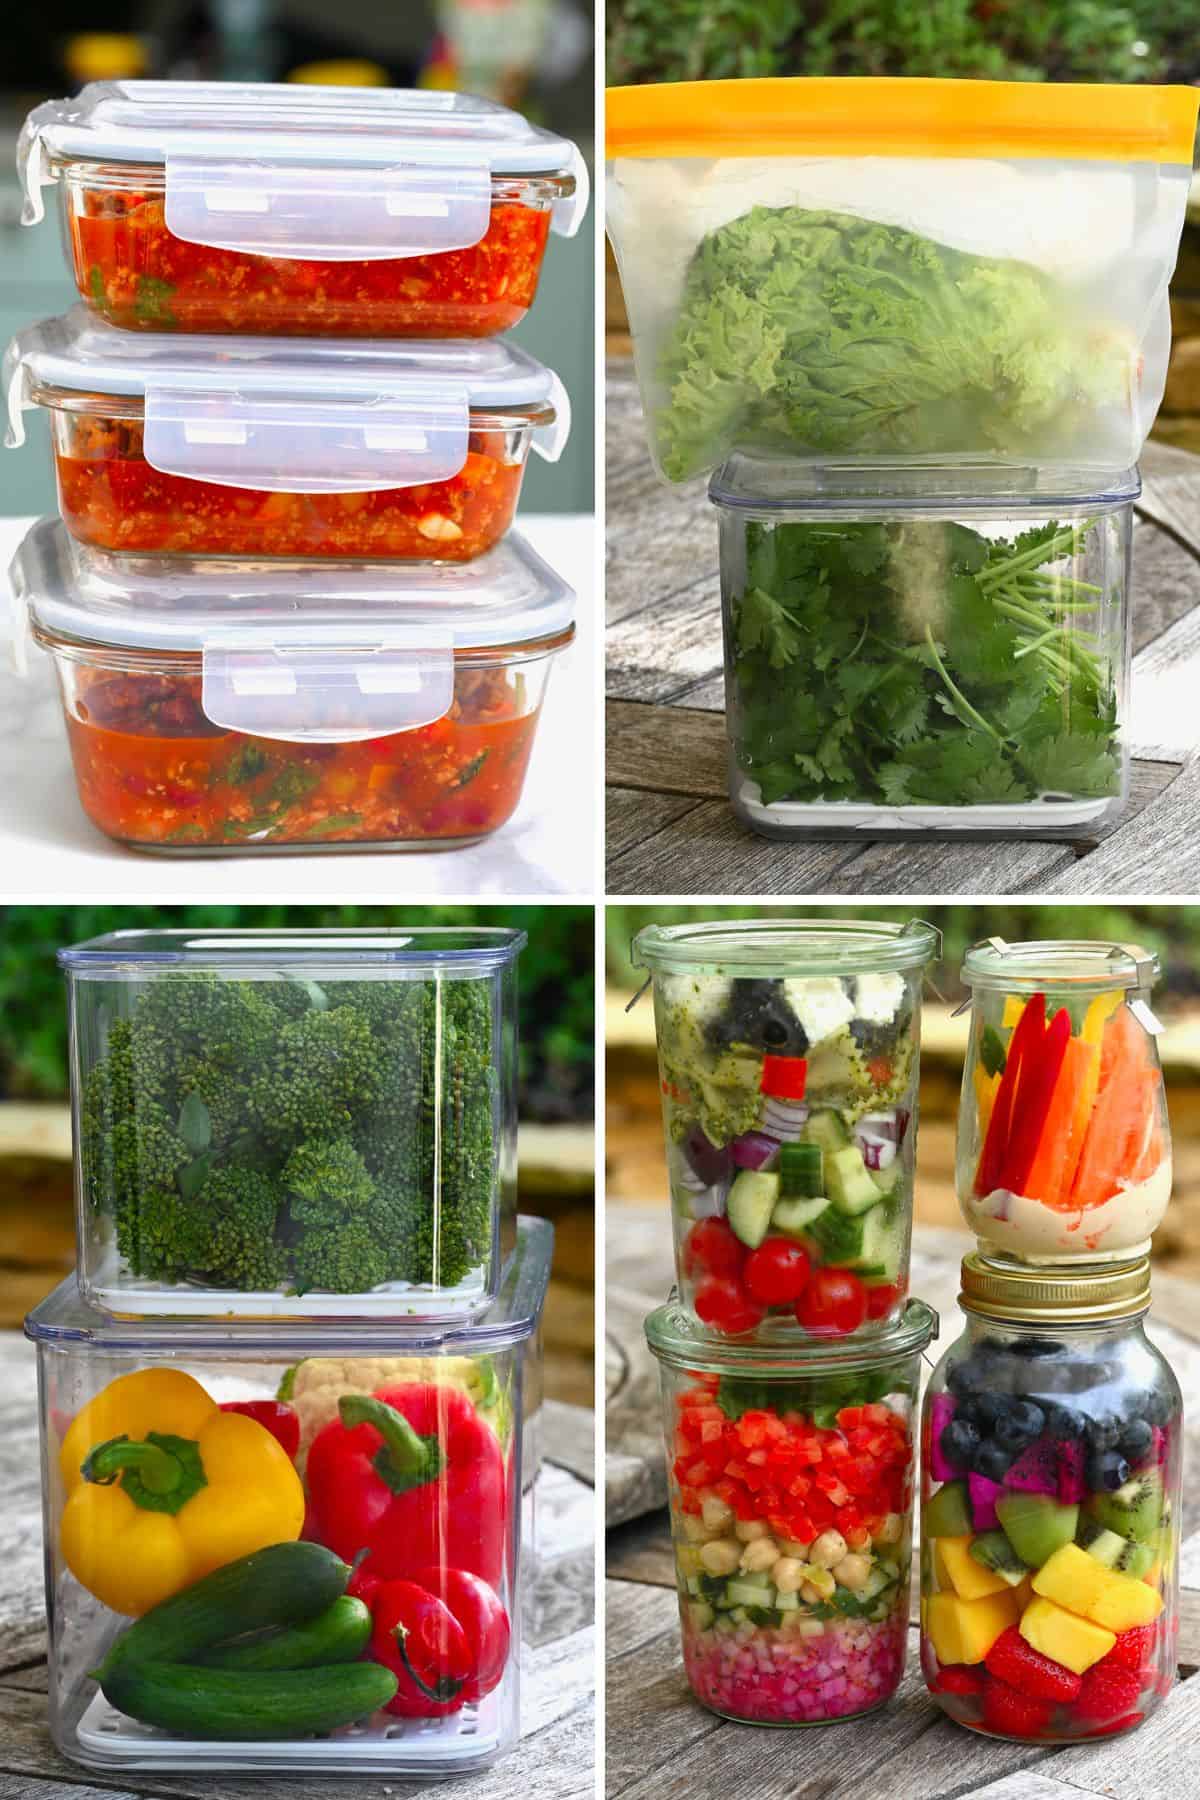 Clear containers that show what food is inside